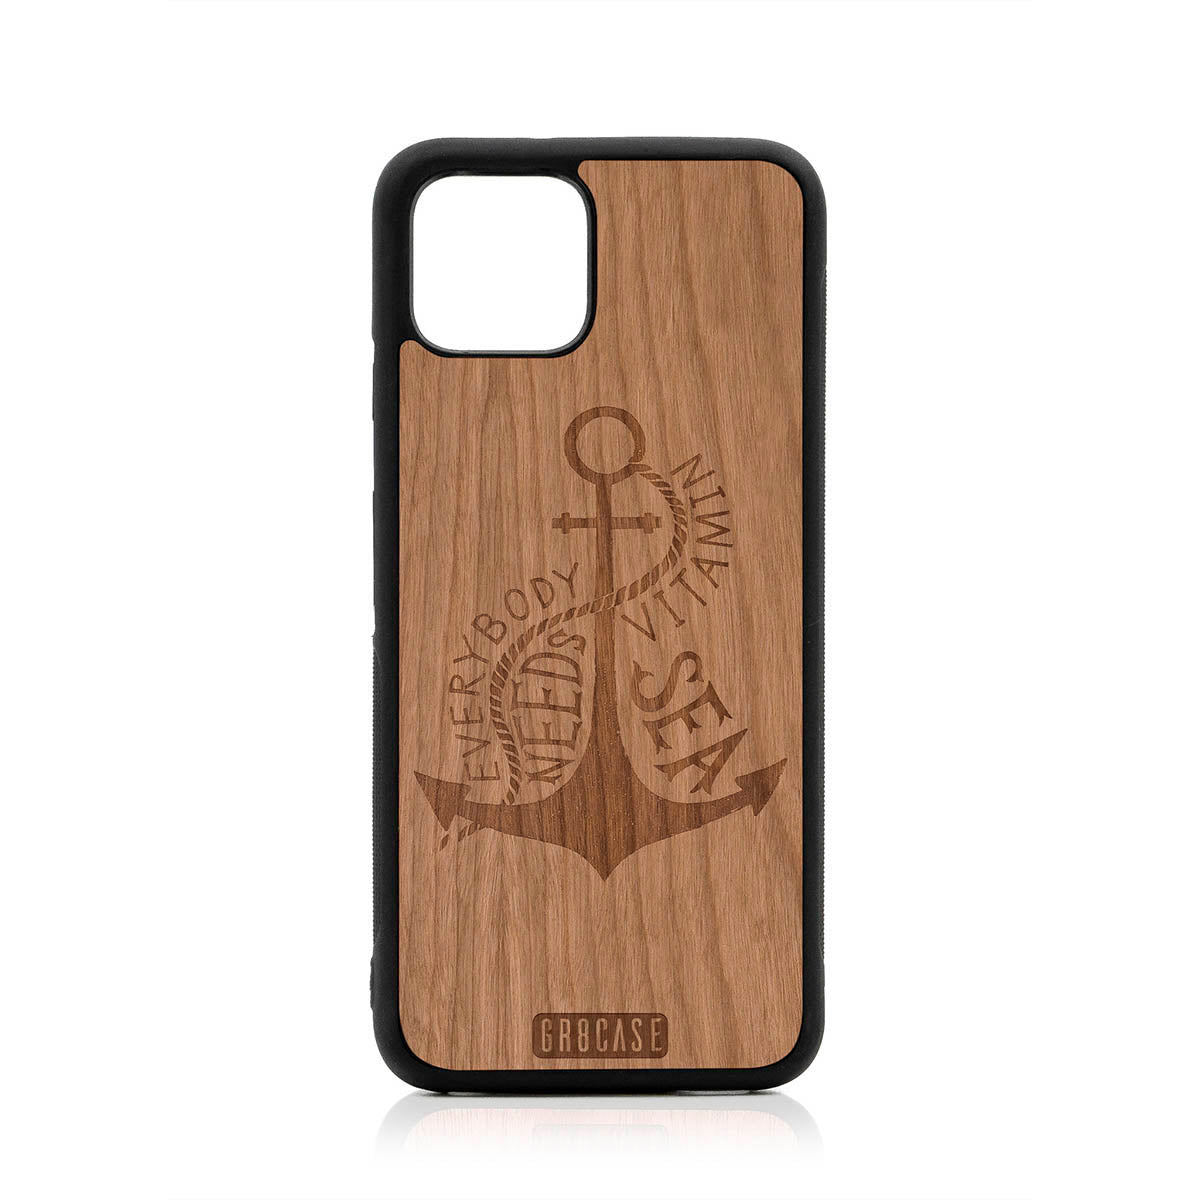 Everybody Needs Vitamin Sea (Anchor) Design Wood Case For Google Pixel 4 by GR8CASE